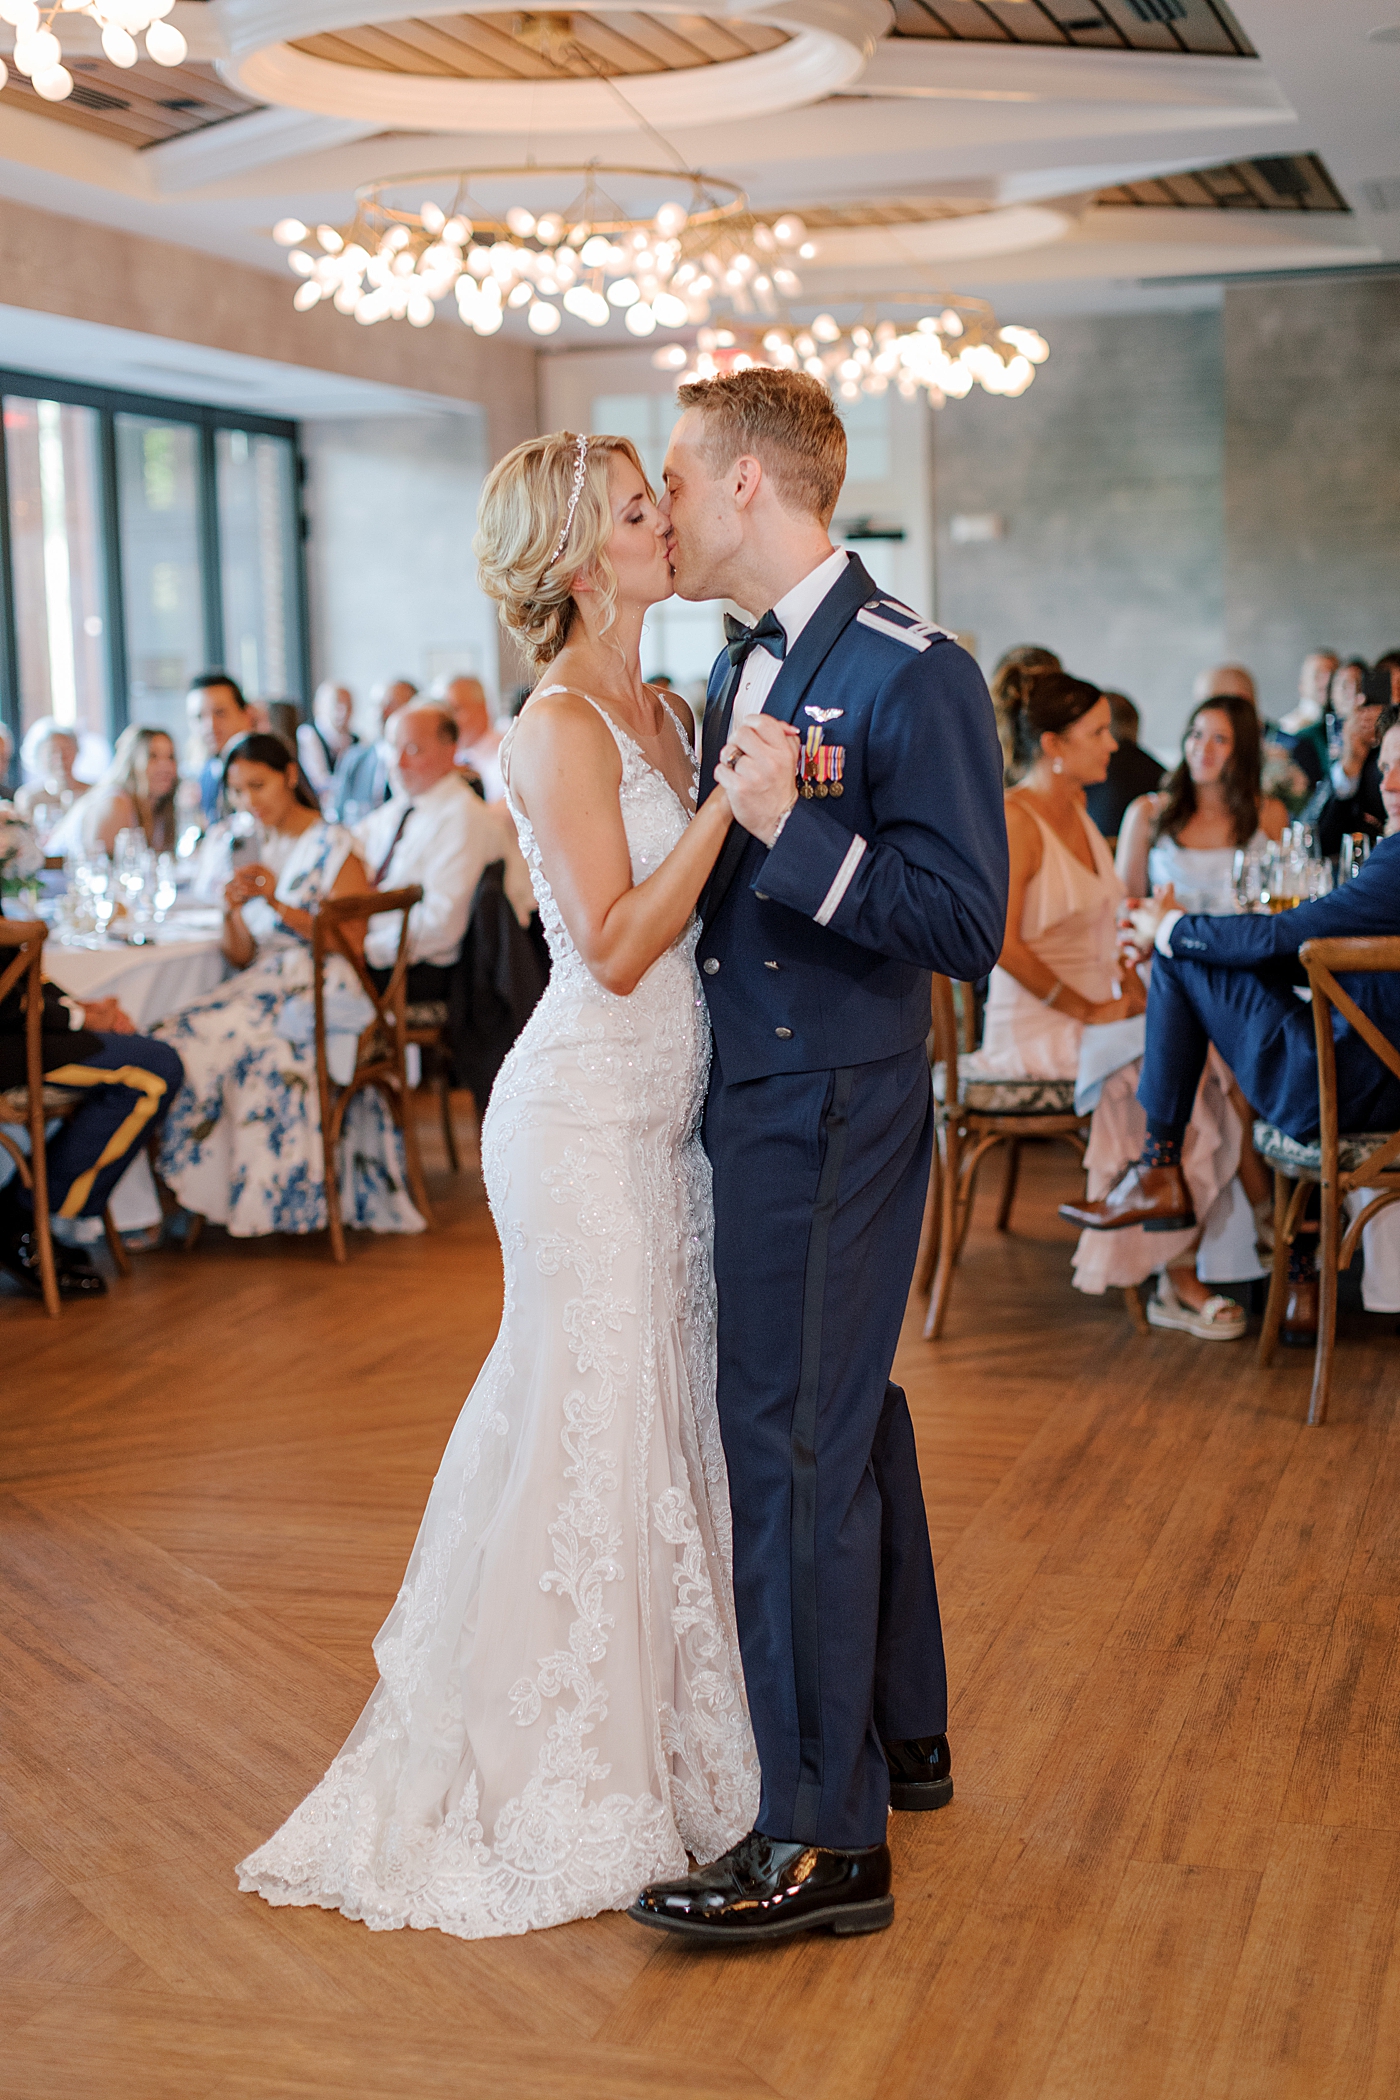 Bride and groom during their first dance | Image by Hope Helmuth Photography